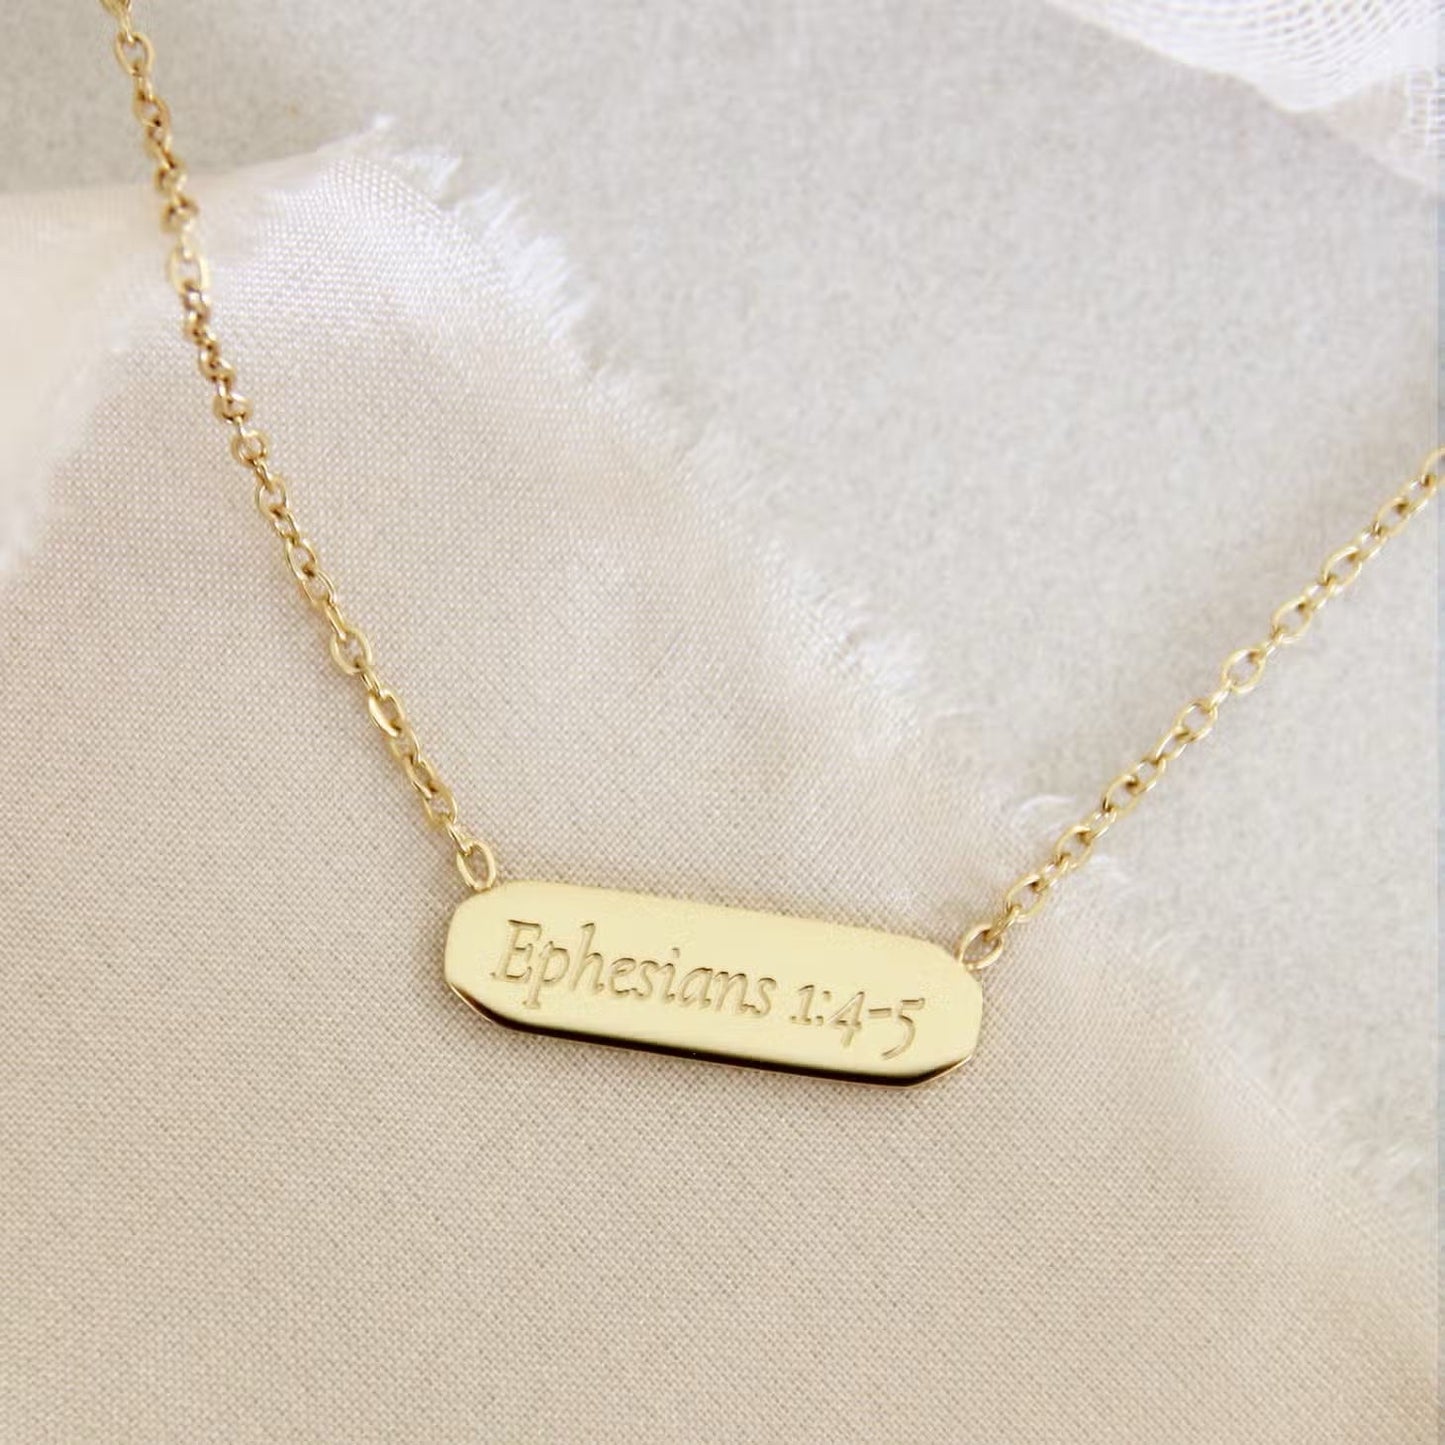 Chosen Plated Necklace